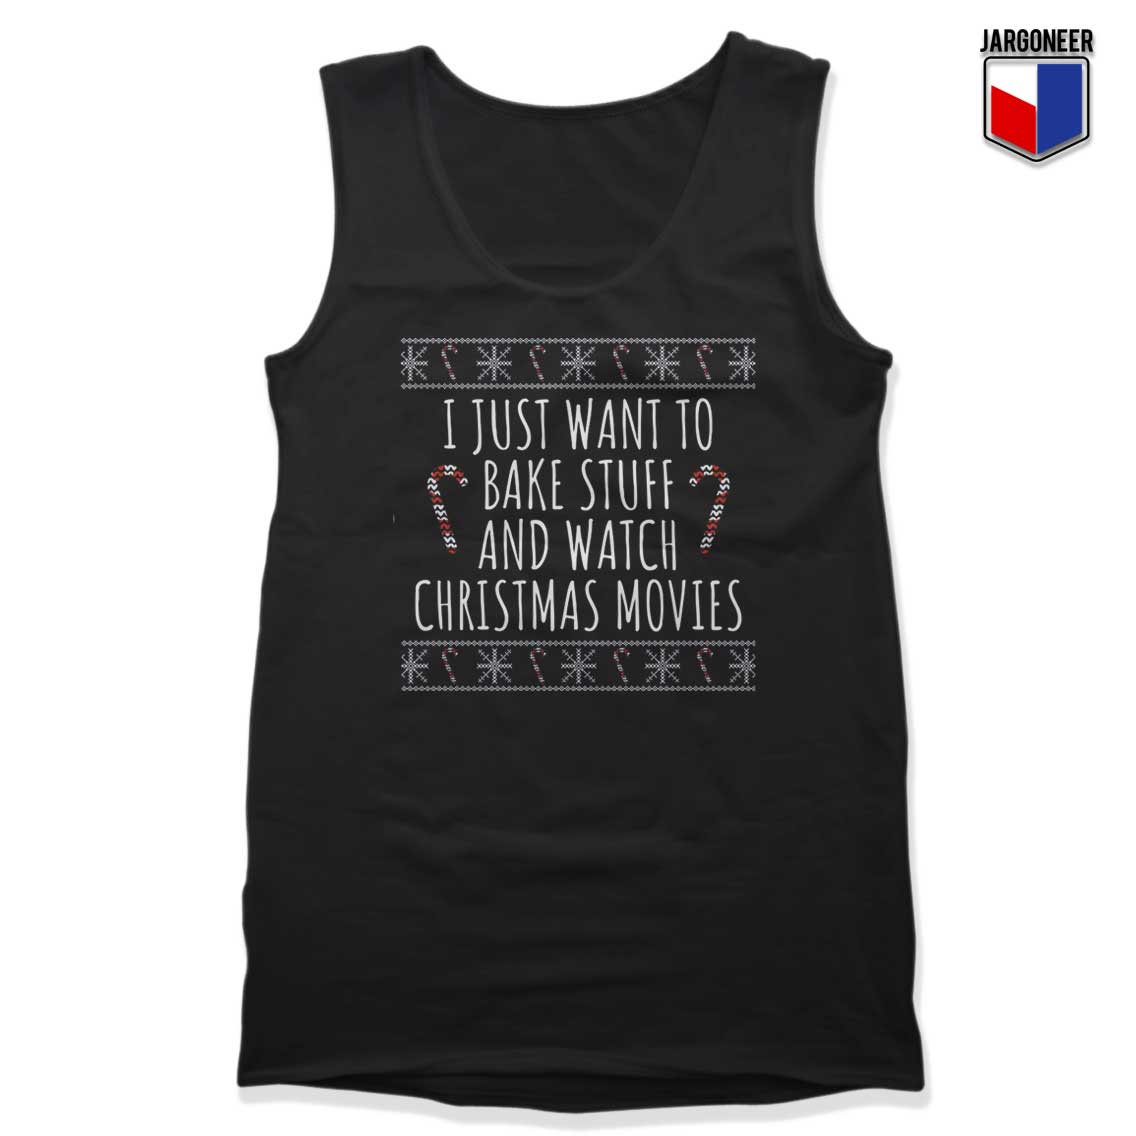 I Just Want To Bake Stuff Tank Top - Shop Unique Graphic Cool Shirt Designs